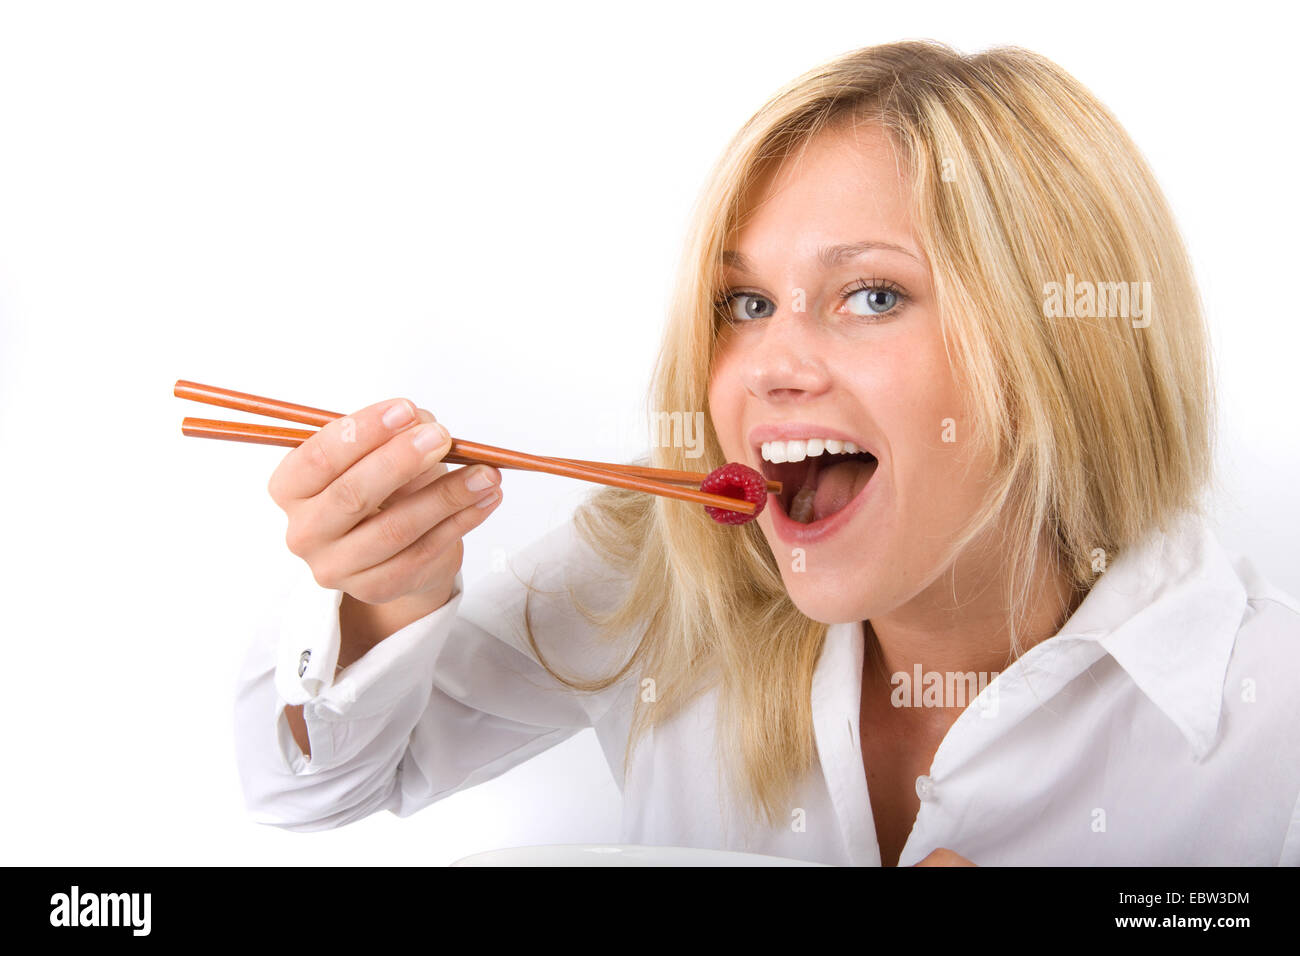 blond young woman smiling while eating a single raspberry from a plate with chopsticks Stock Photo